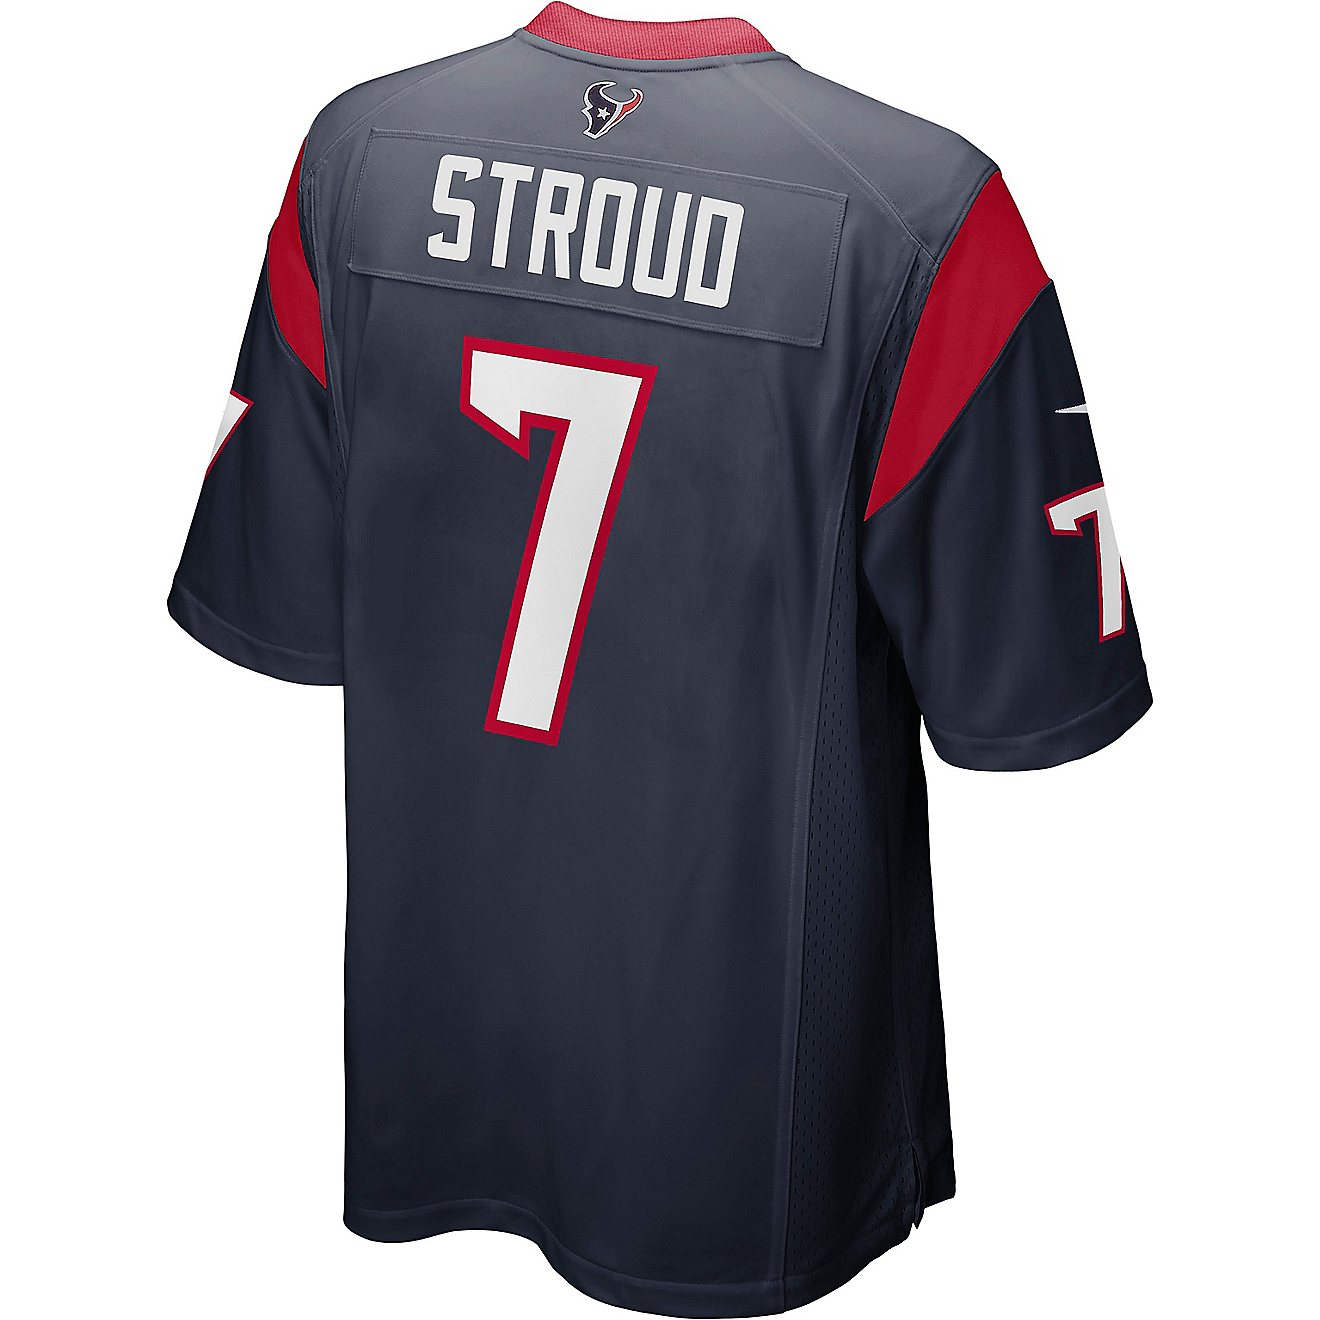 Nike Men's Houston Texans CJ Stroud 7 Home Game Jersey                                                                           - view number 1